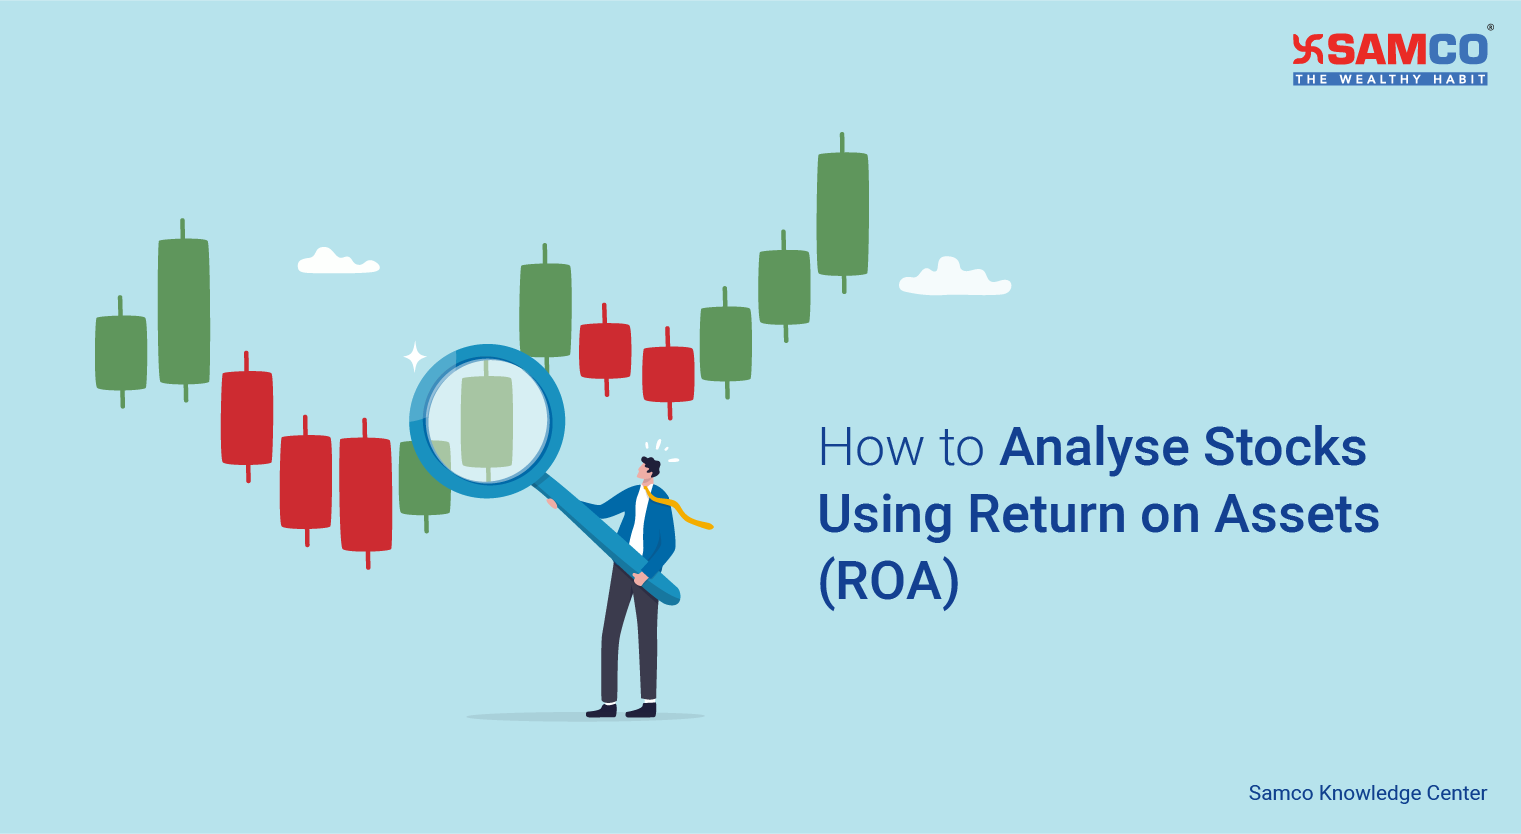 How to Analyse Stocks Using Return on Assets (ROA)